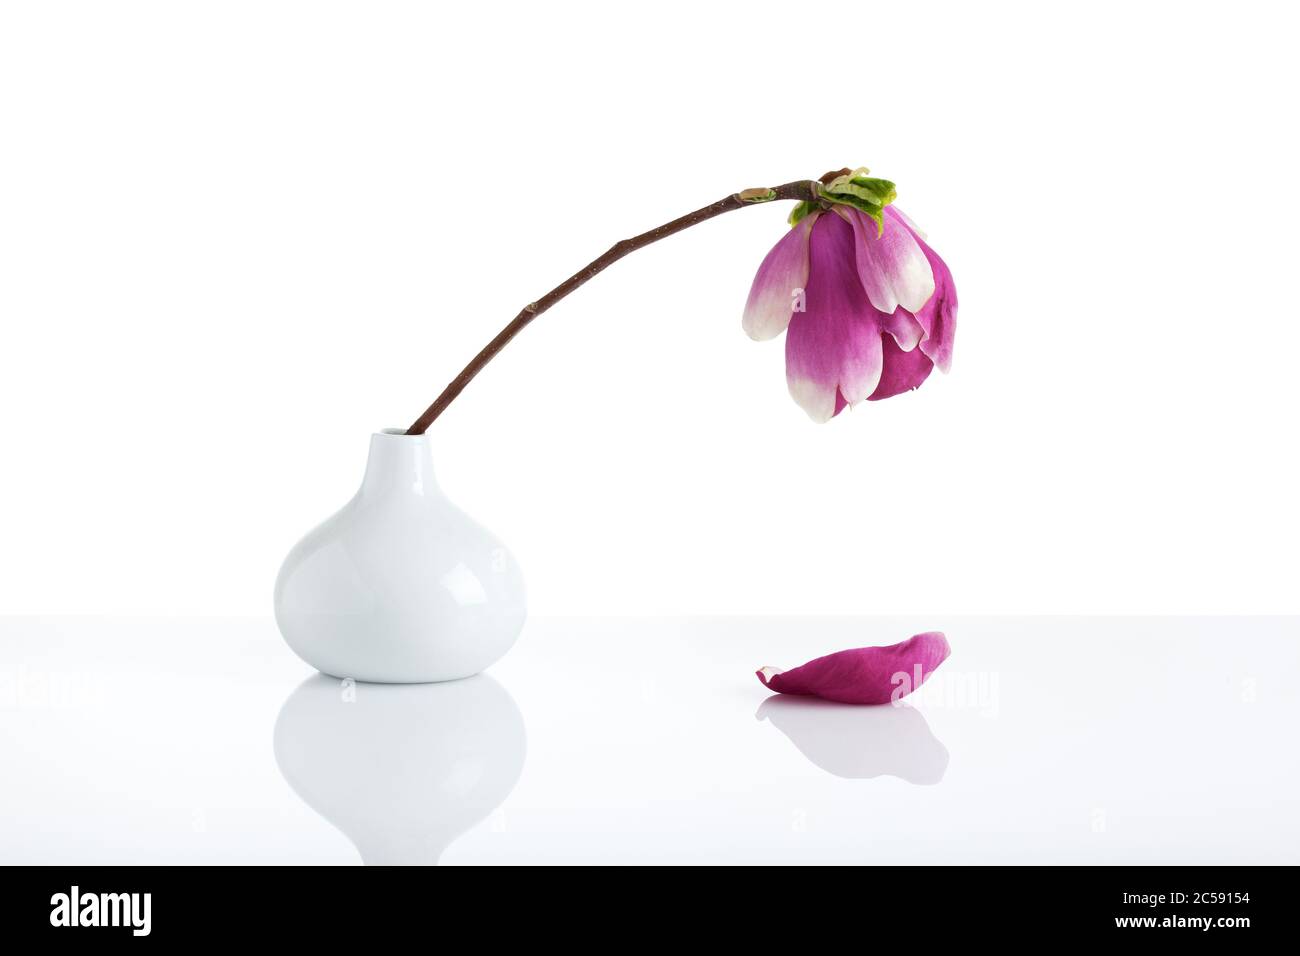 single wilting magnolia blossom in white drop-shaped vase, one petal fallen down, white background Stock Photo